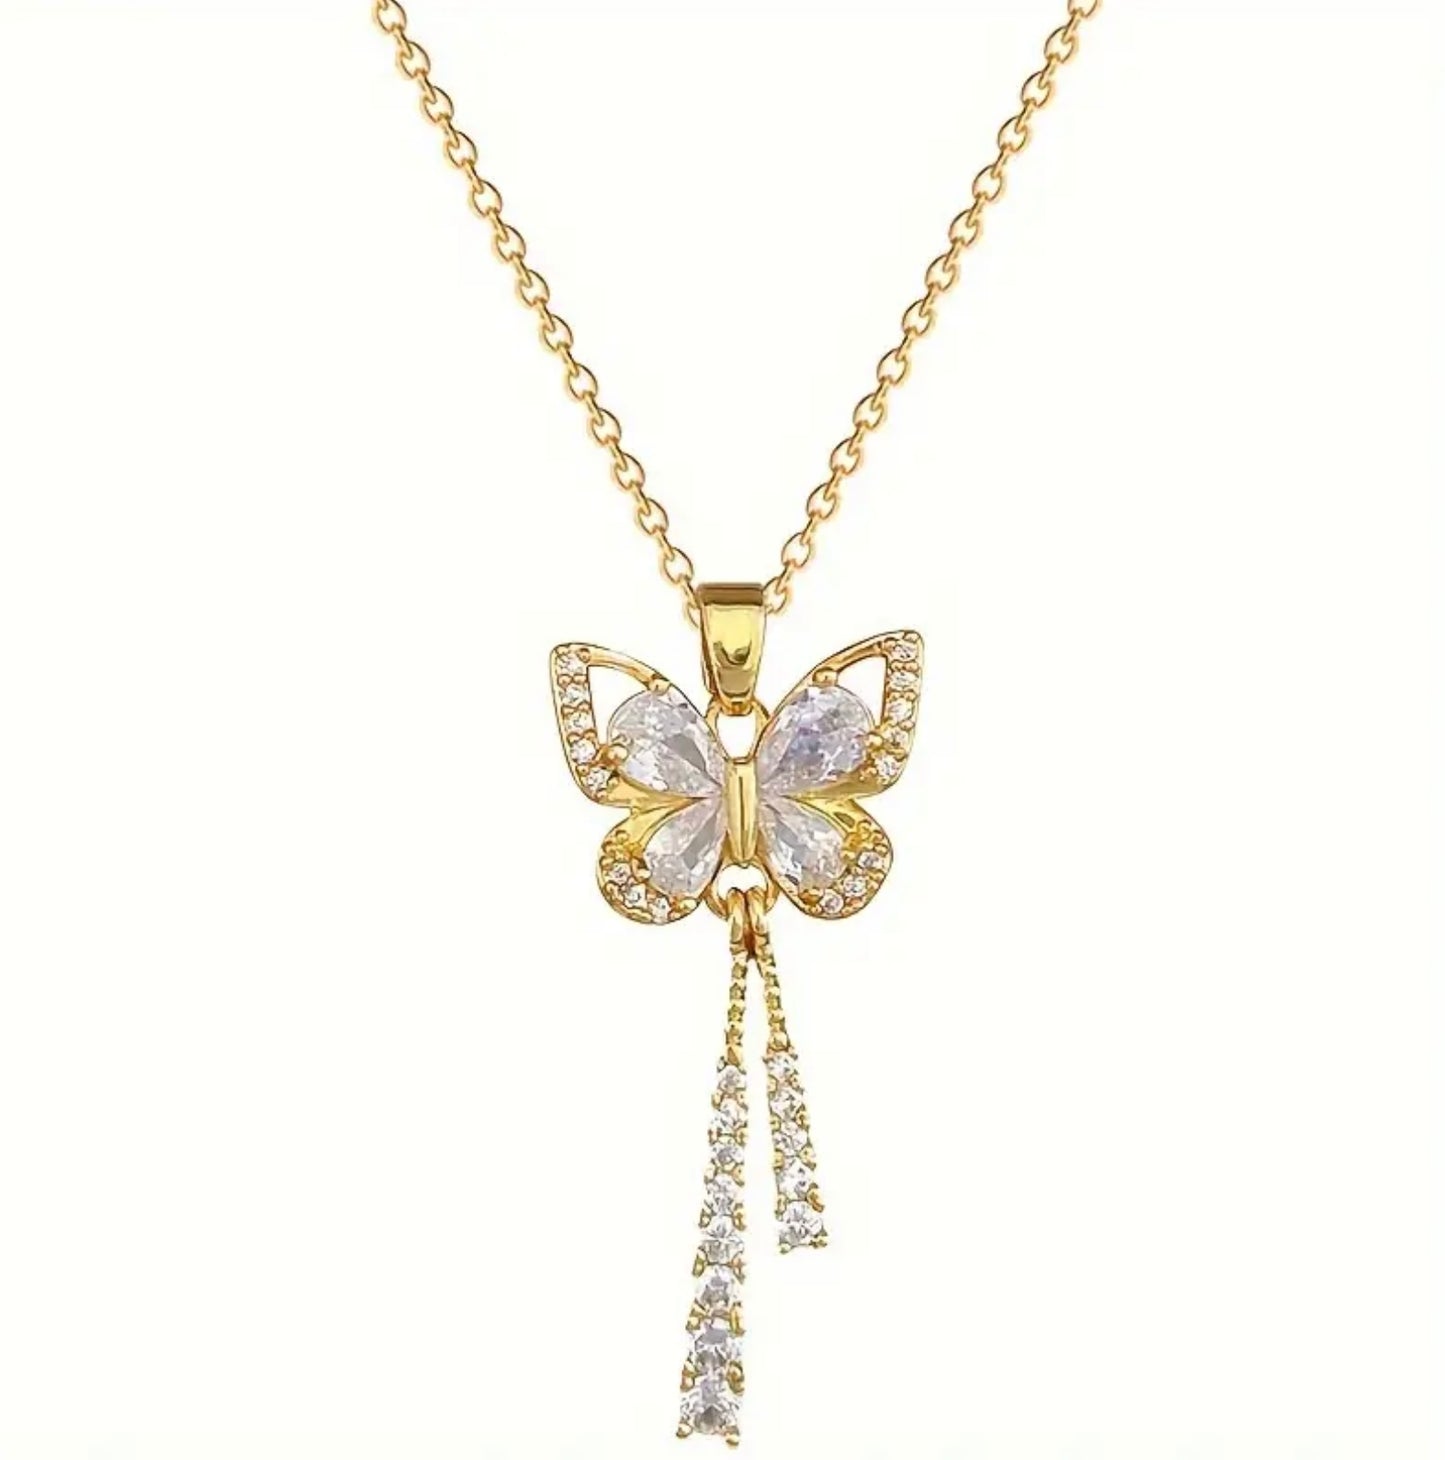 Mekki Butterfly Luxury Pendant Necklace Long Sparkling Cubic Zirconia Necklace Beautiful Gift